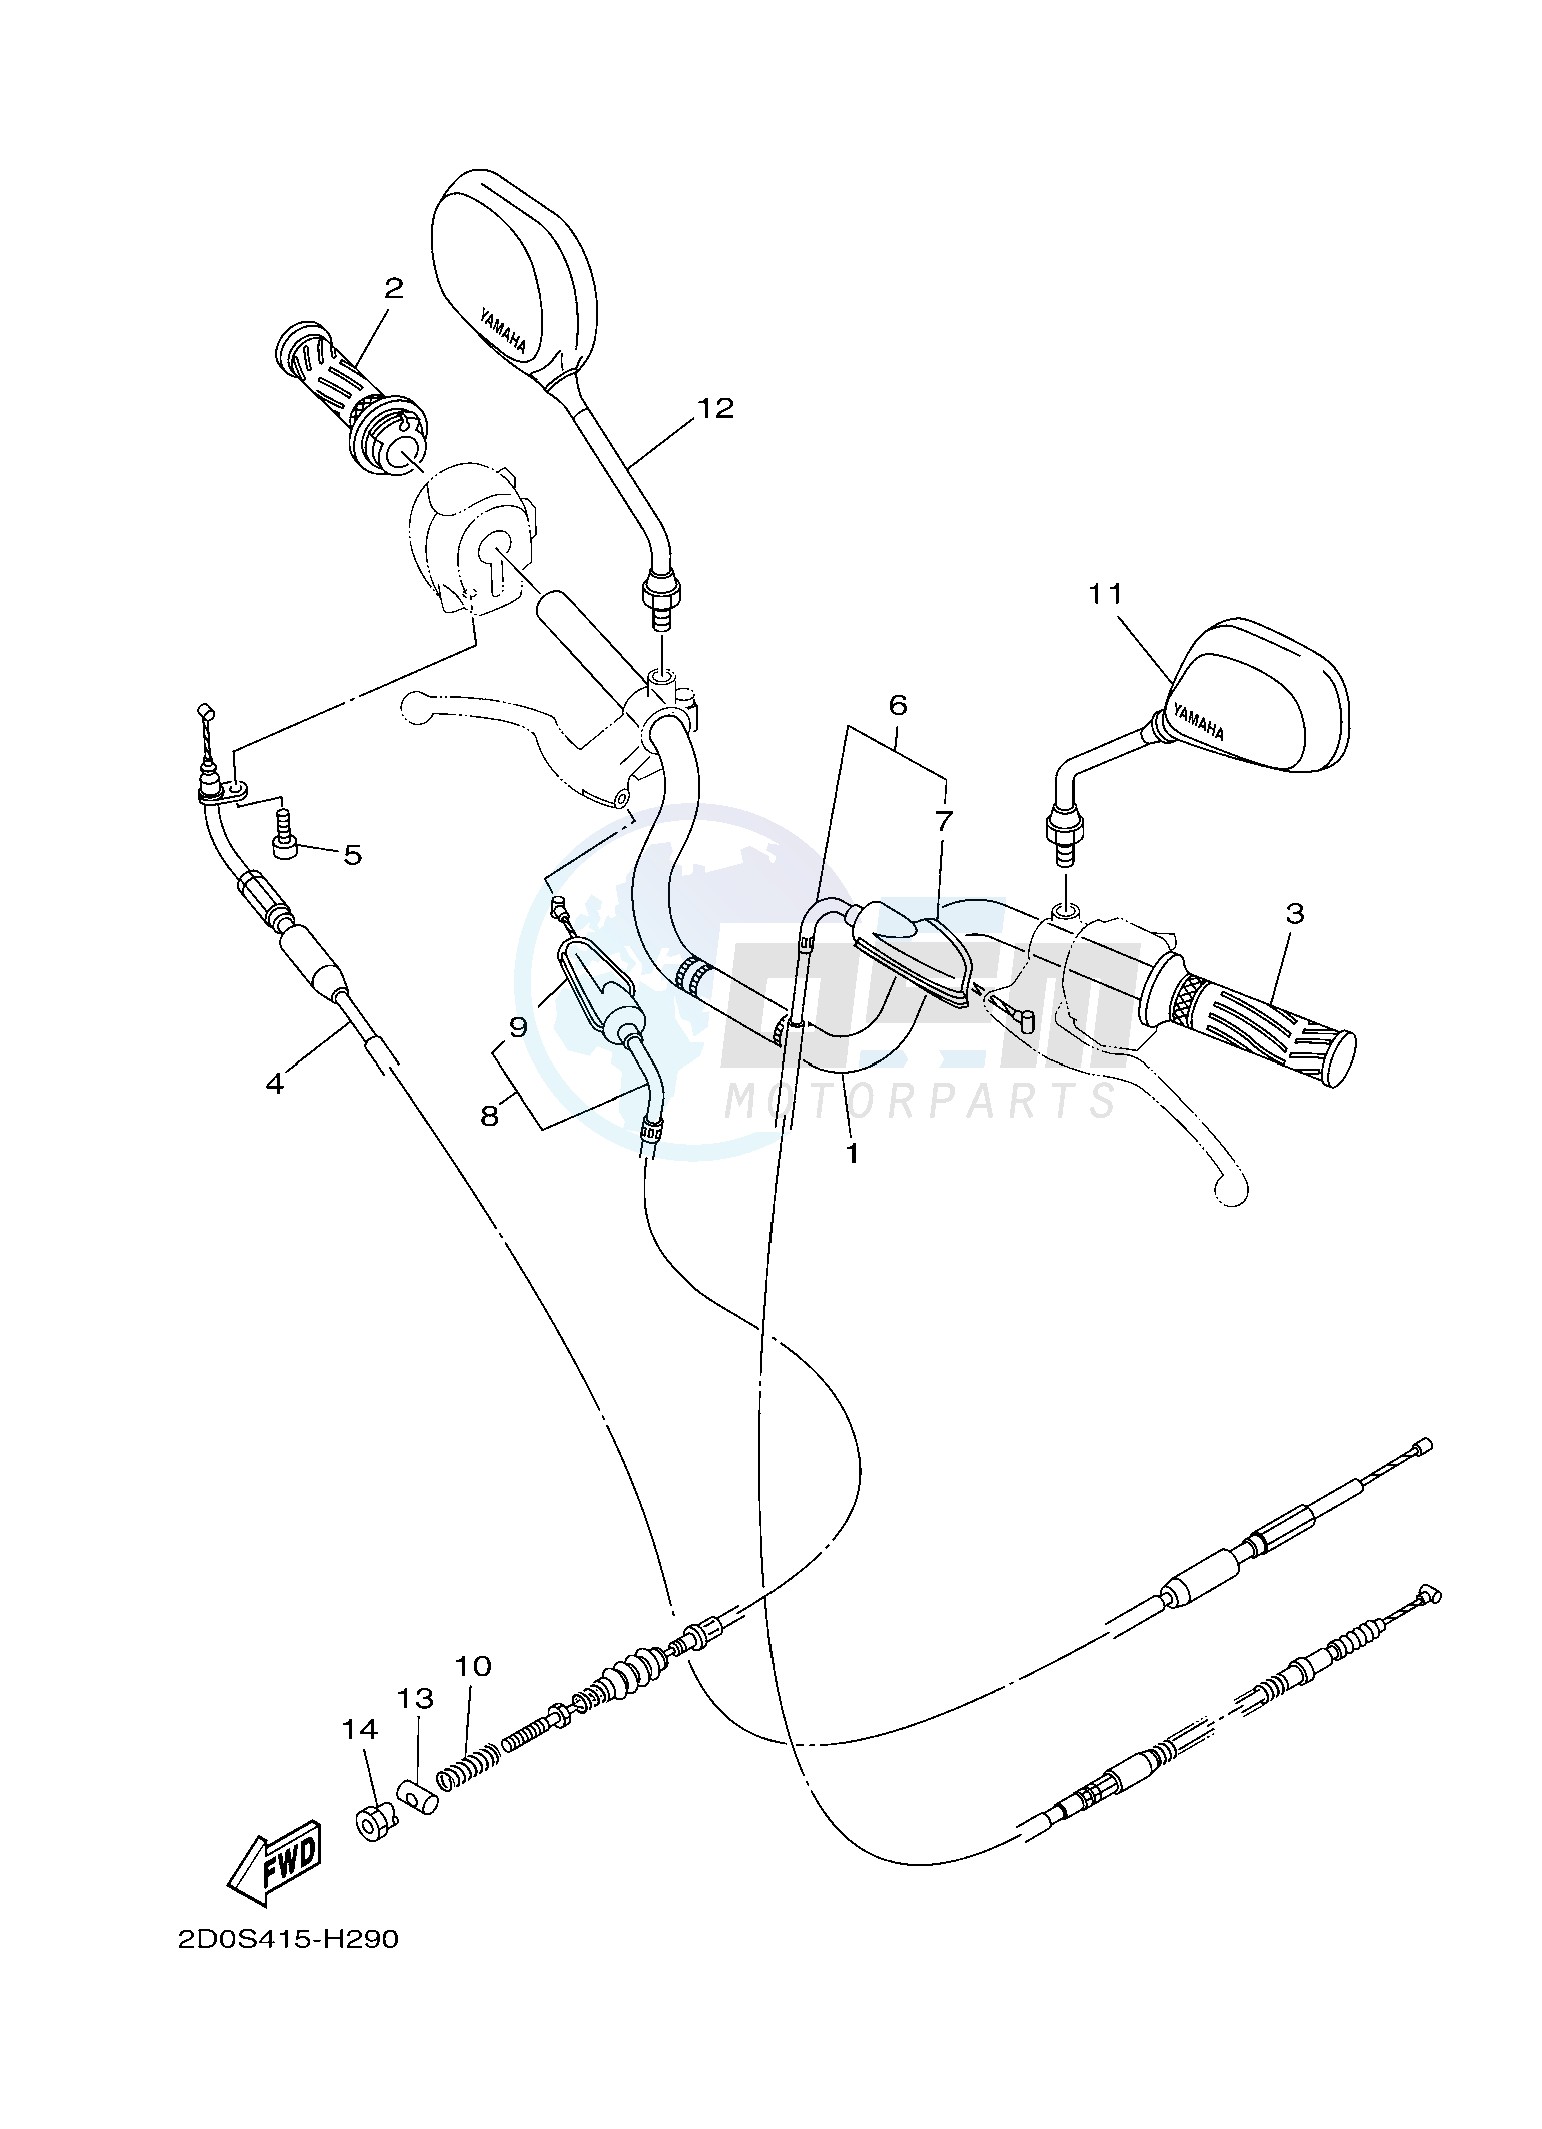 M. STEERING HANDLE & CABLE blueprint